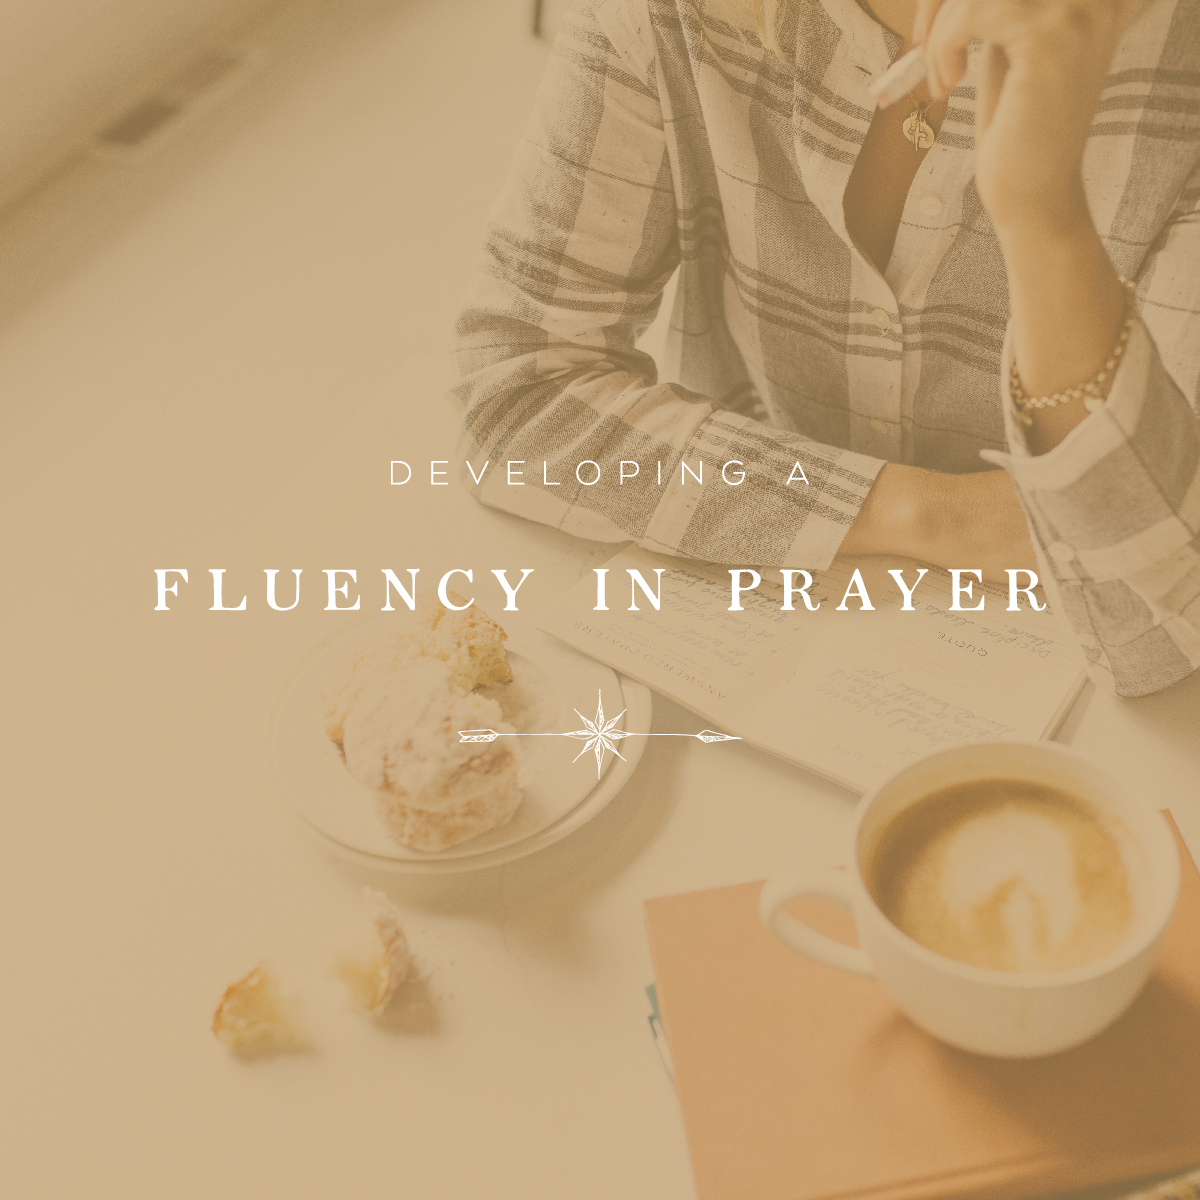 Developing a Fluency in Prayer Course by Val Marie Paper, prayer journal, spiritual growth, new year, resolution, word of the year, cultivate, war room, notebook, church, Bible study, women's ministry, motherhood